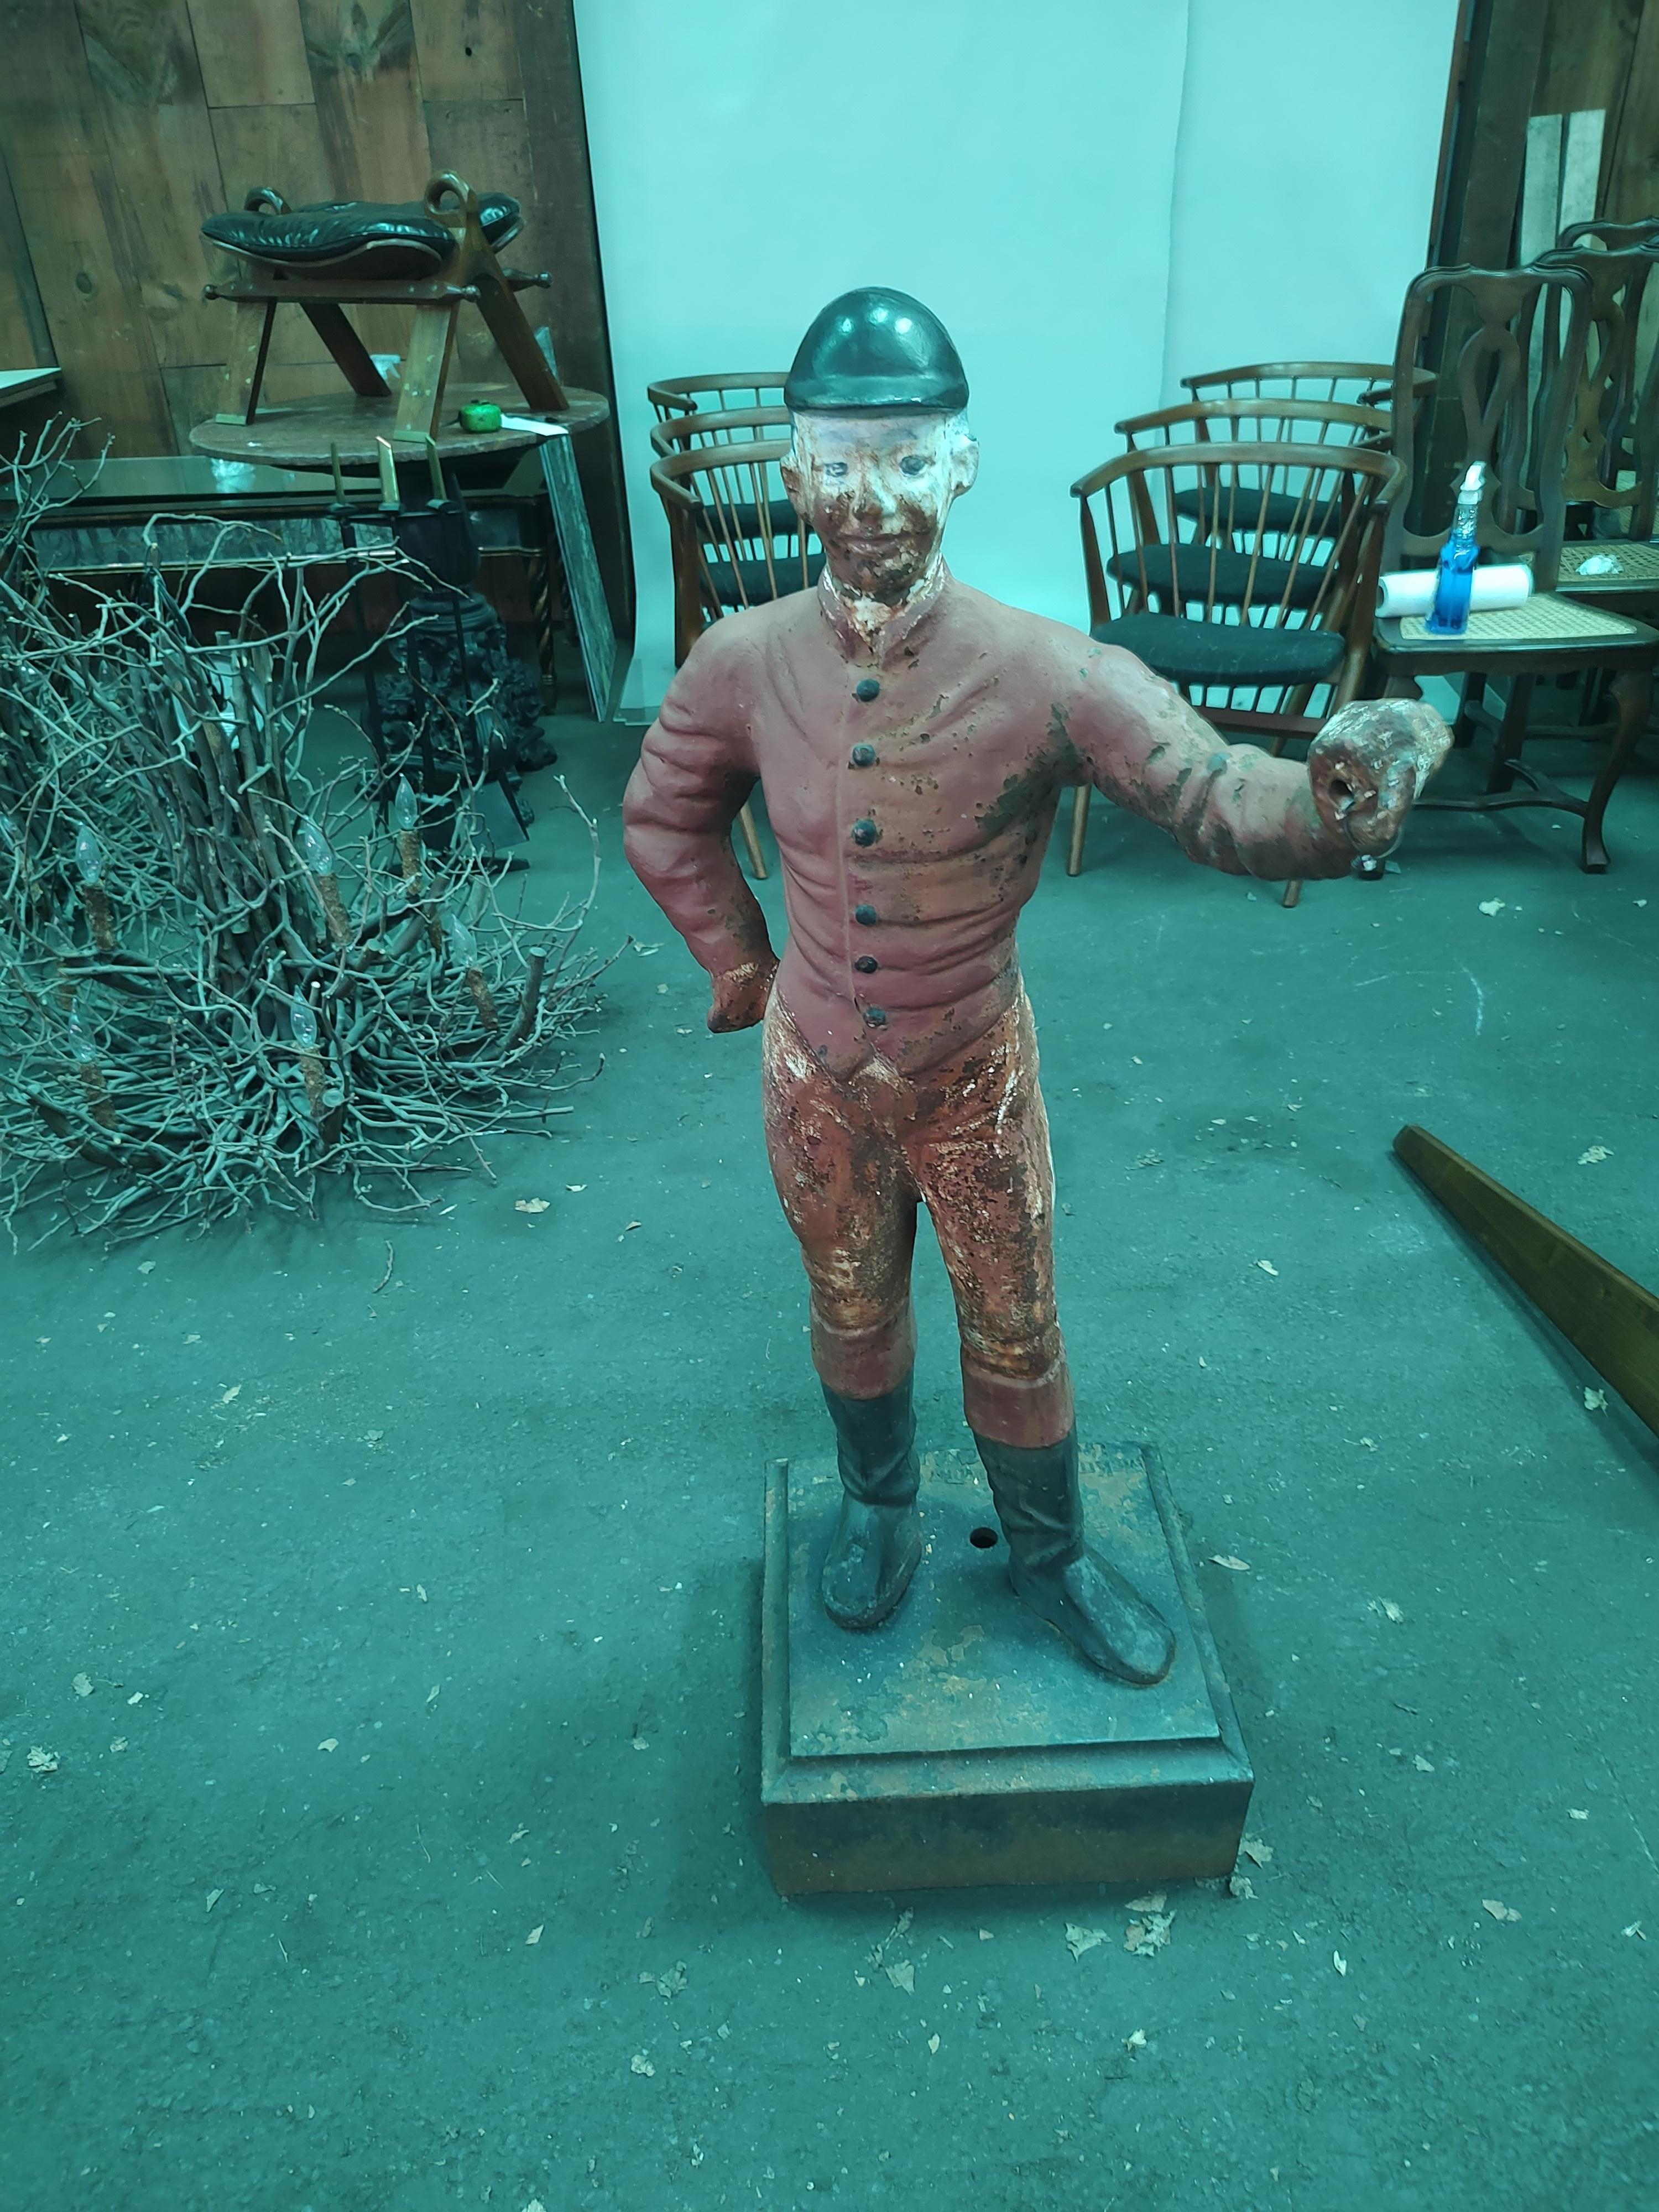 Tall elegant cast iron lawn jockey by the Scott McKittrick foundry located in Union Beach NJ during the latter part of the 19th century. In excellent antique condition with no damage cracks or breaks. Just normal age related wear to the surface.